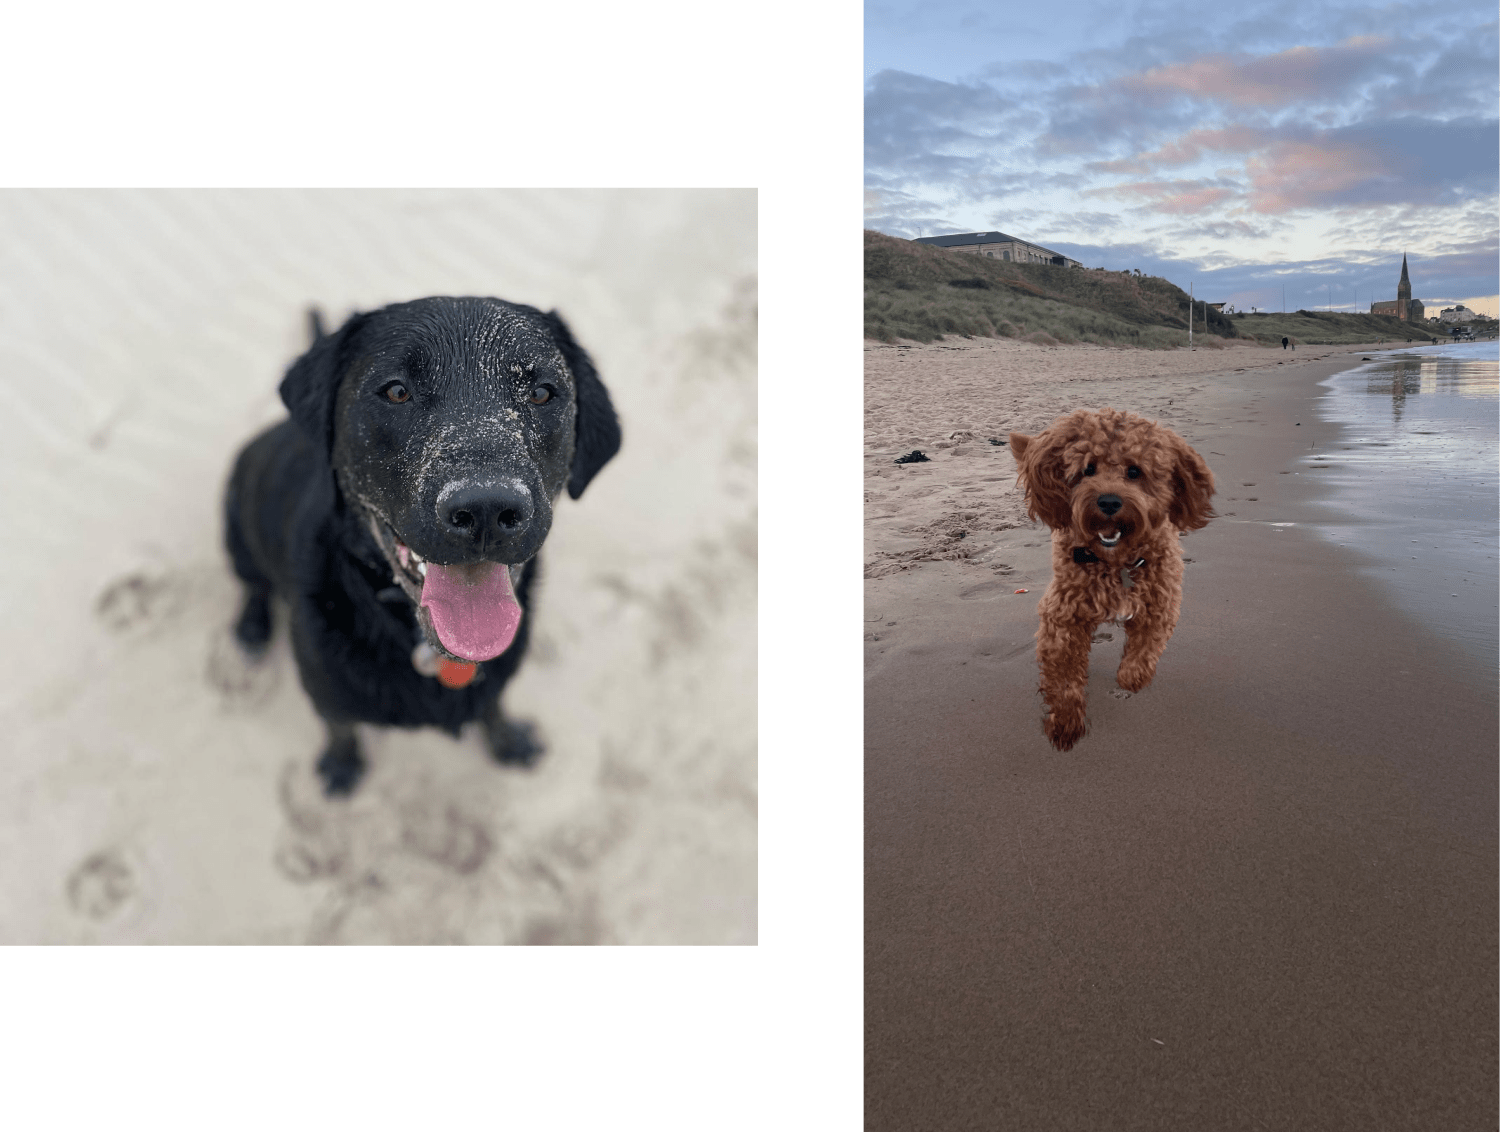 Poe and Henry at the beach